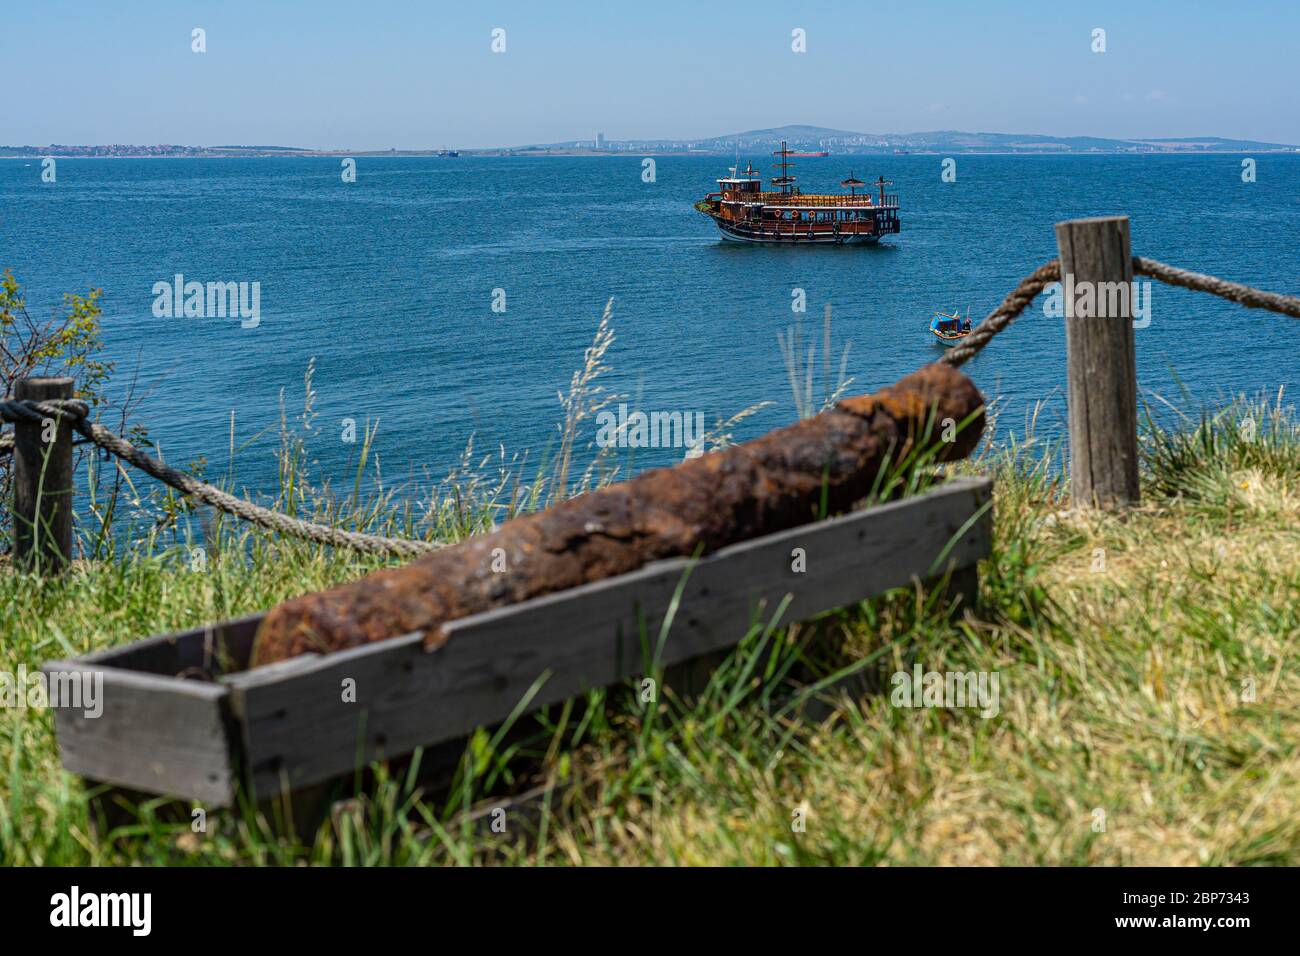 ST. ANASTASIA ISLAND, BULGARIA - JUNE 23, 2019: Pleasure boat in the Burgas Bay of the Black Sea. Sea view from the side of the island of St. Anastasia. In the foreground is an old cannon. Stock Photo